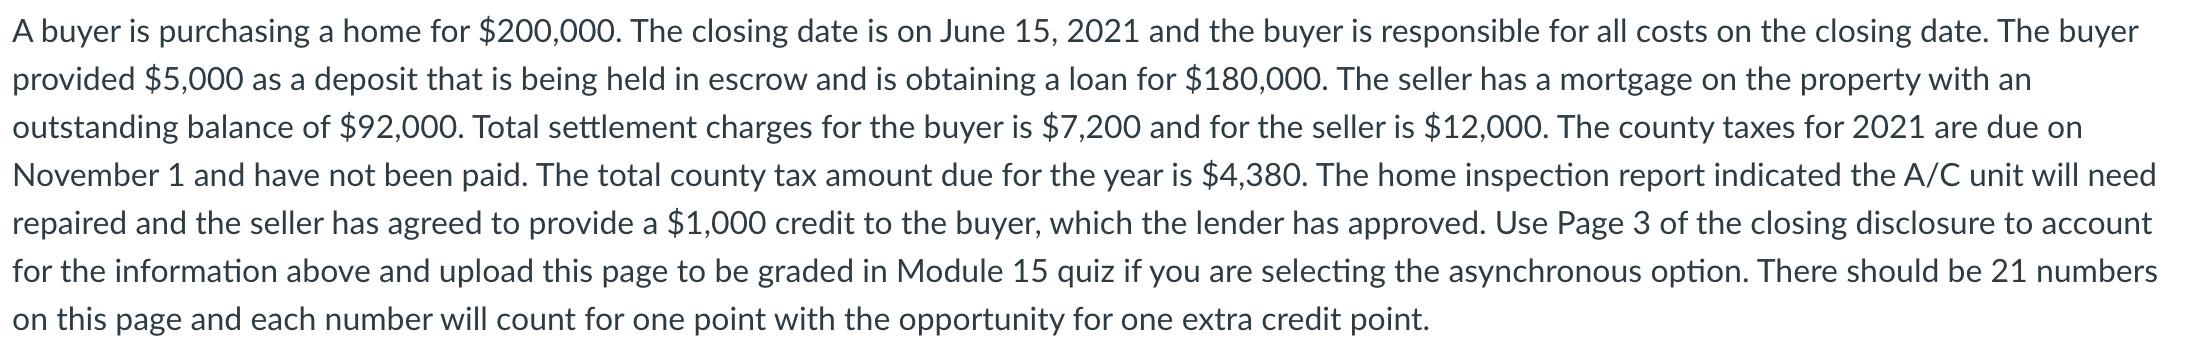 A buyer is purchasing a home for $200,000. The closing date is on June 15, 2021 and the buyer is responsible for all costs on